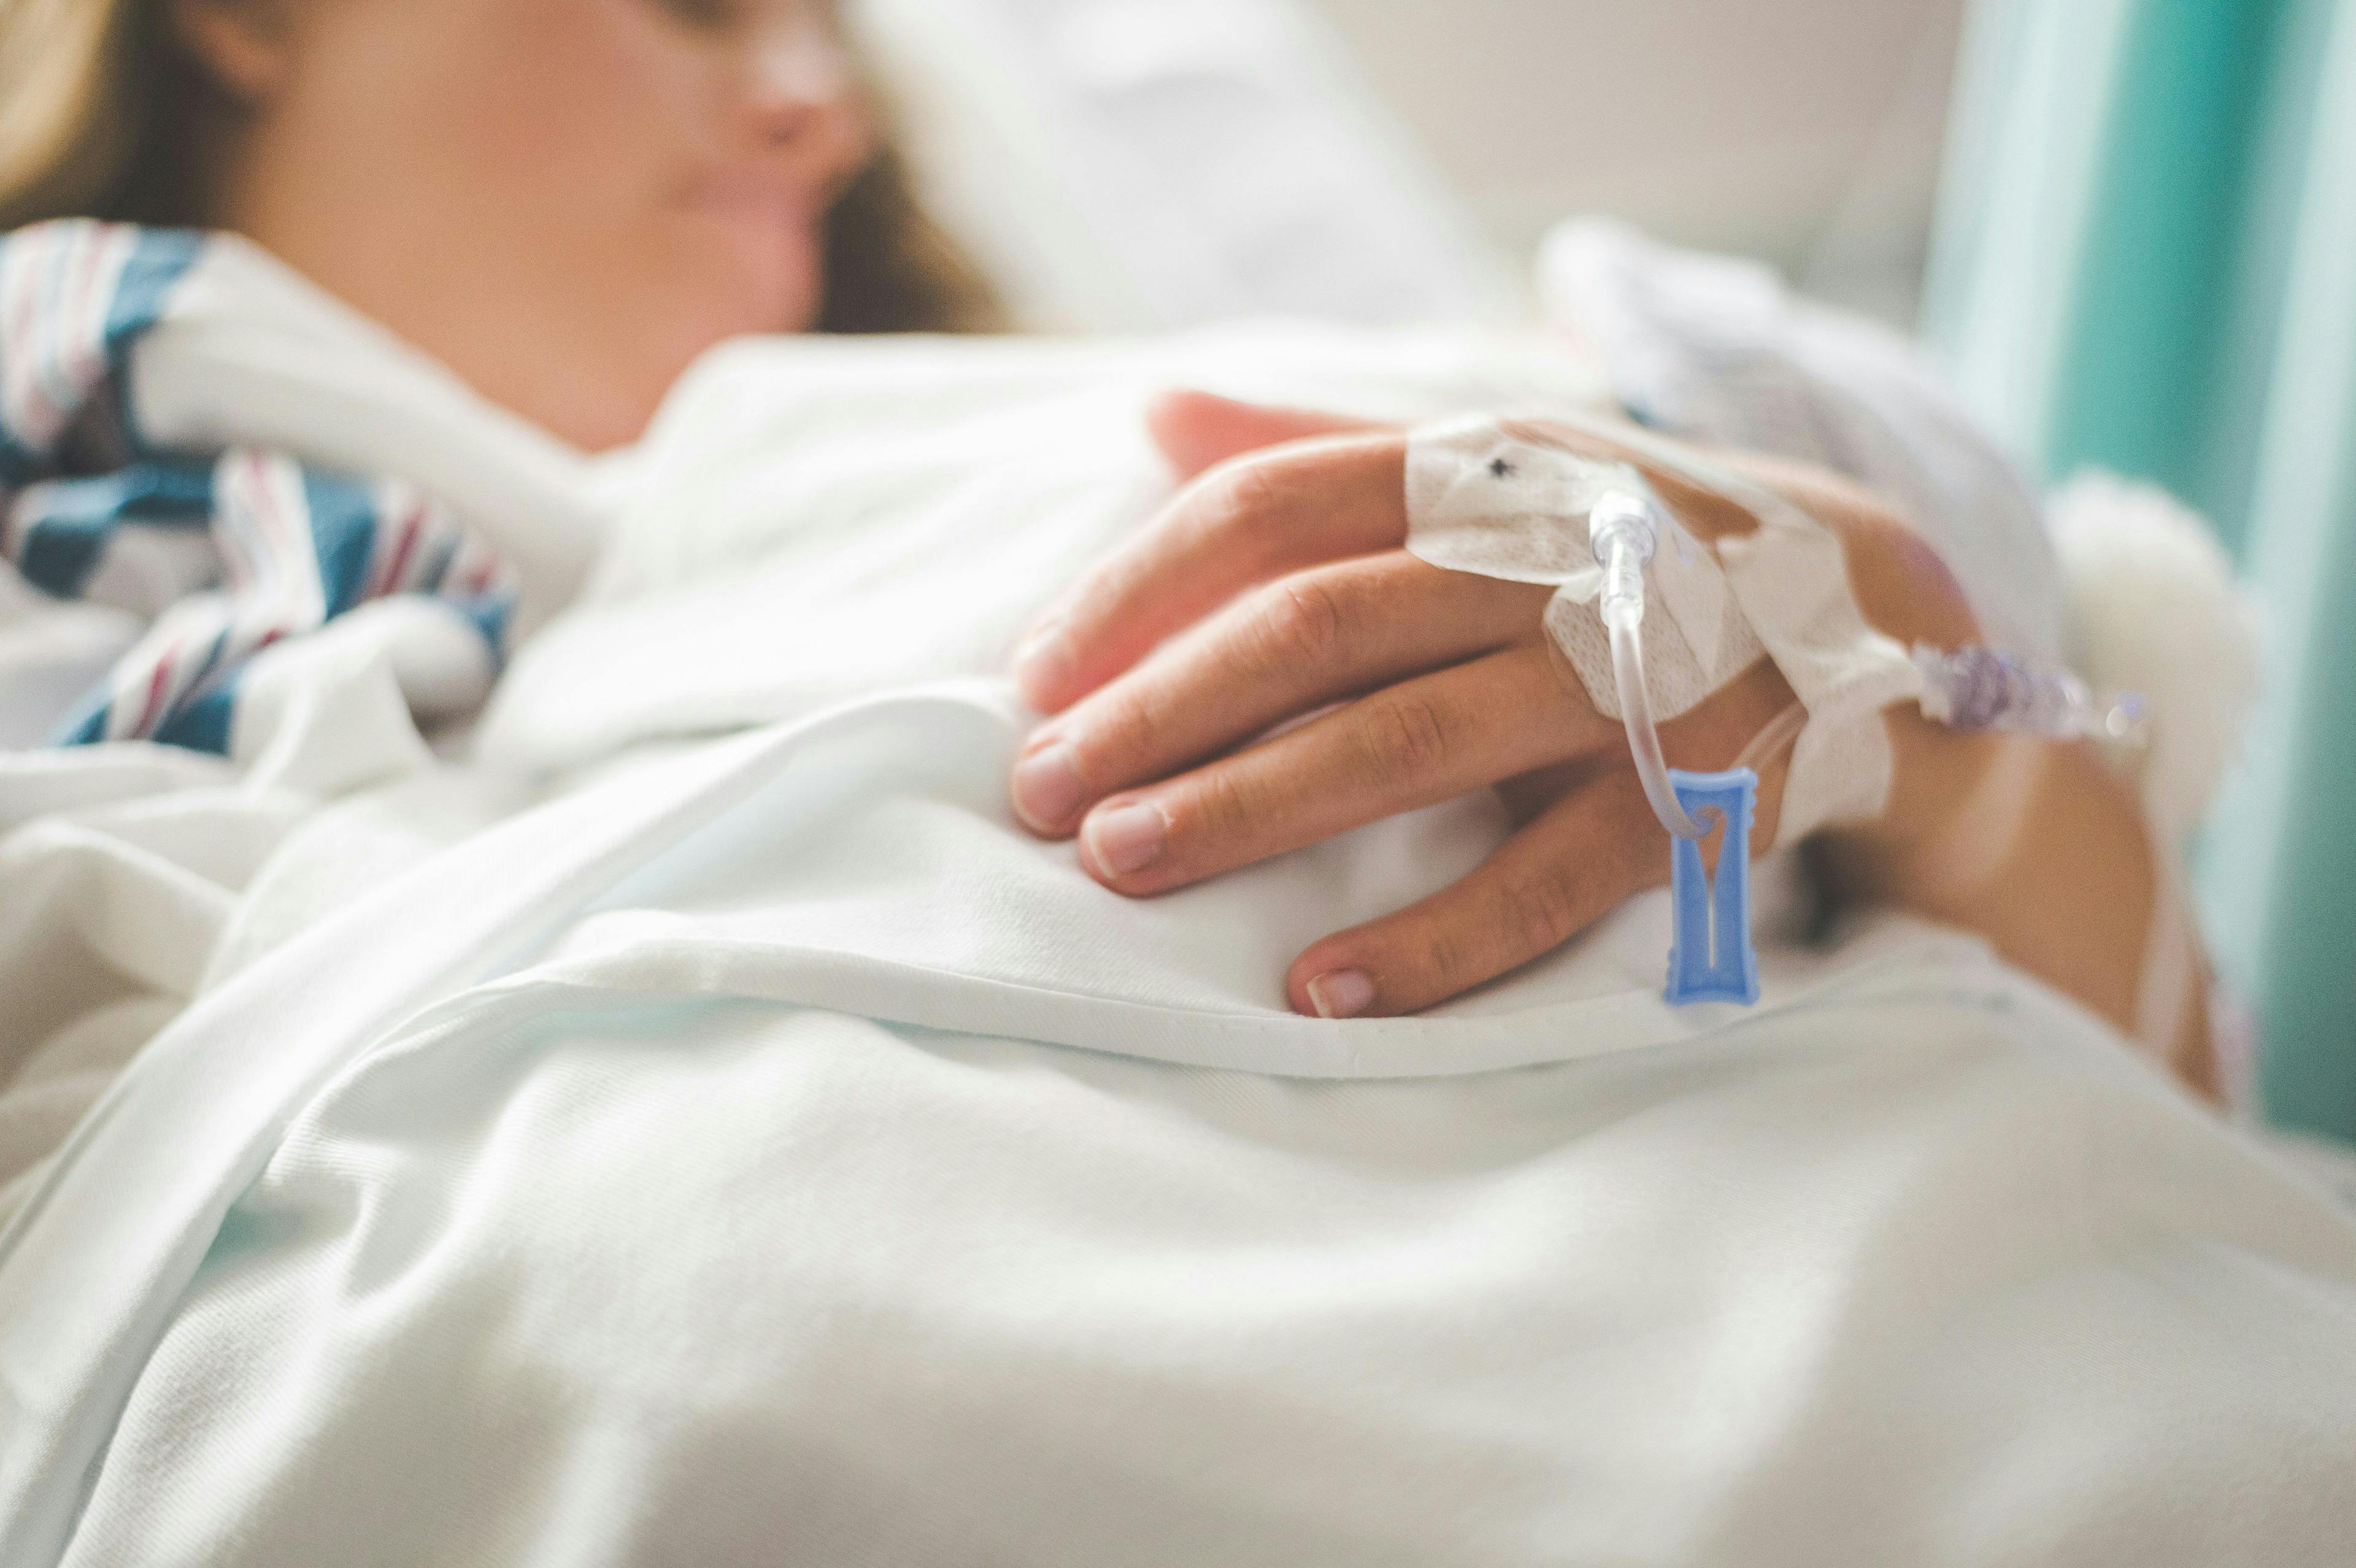 Mortality Rate During Pre-Vaccination Period was 44% for COVID-19 ICU Inpatients 